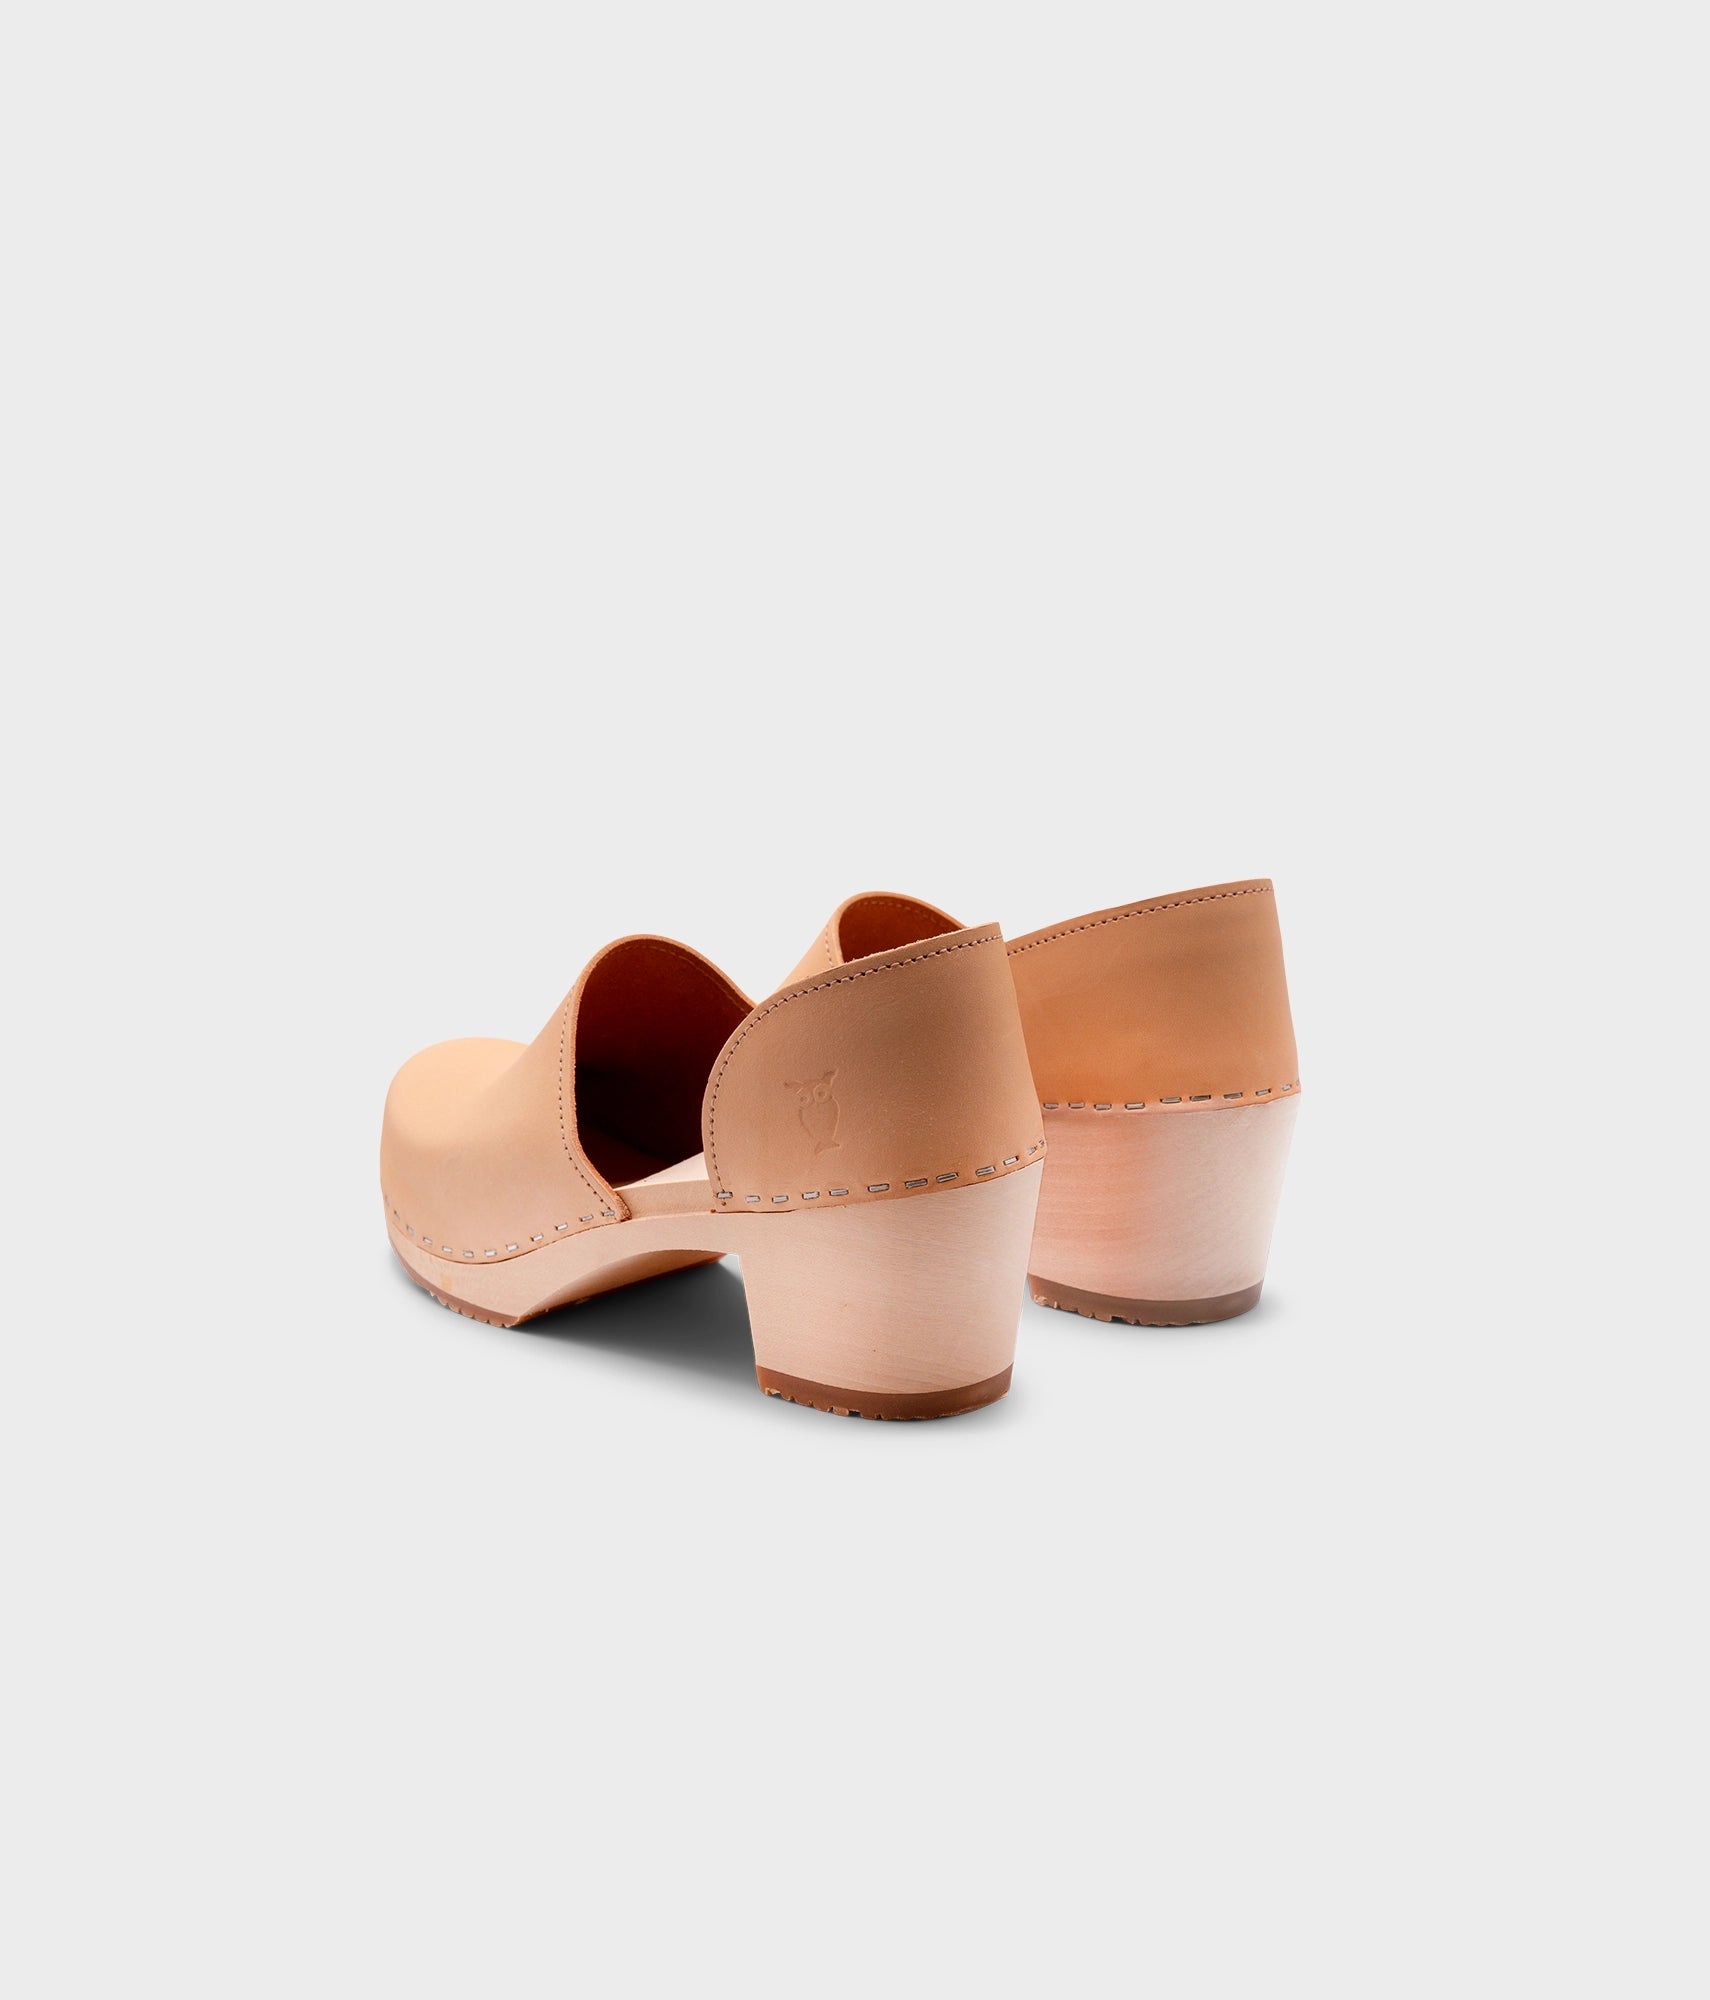 high heeled closed-back clogs in beige ecru vegetable tanned leather stapled on a light wooden base